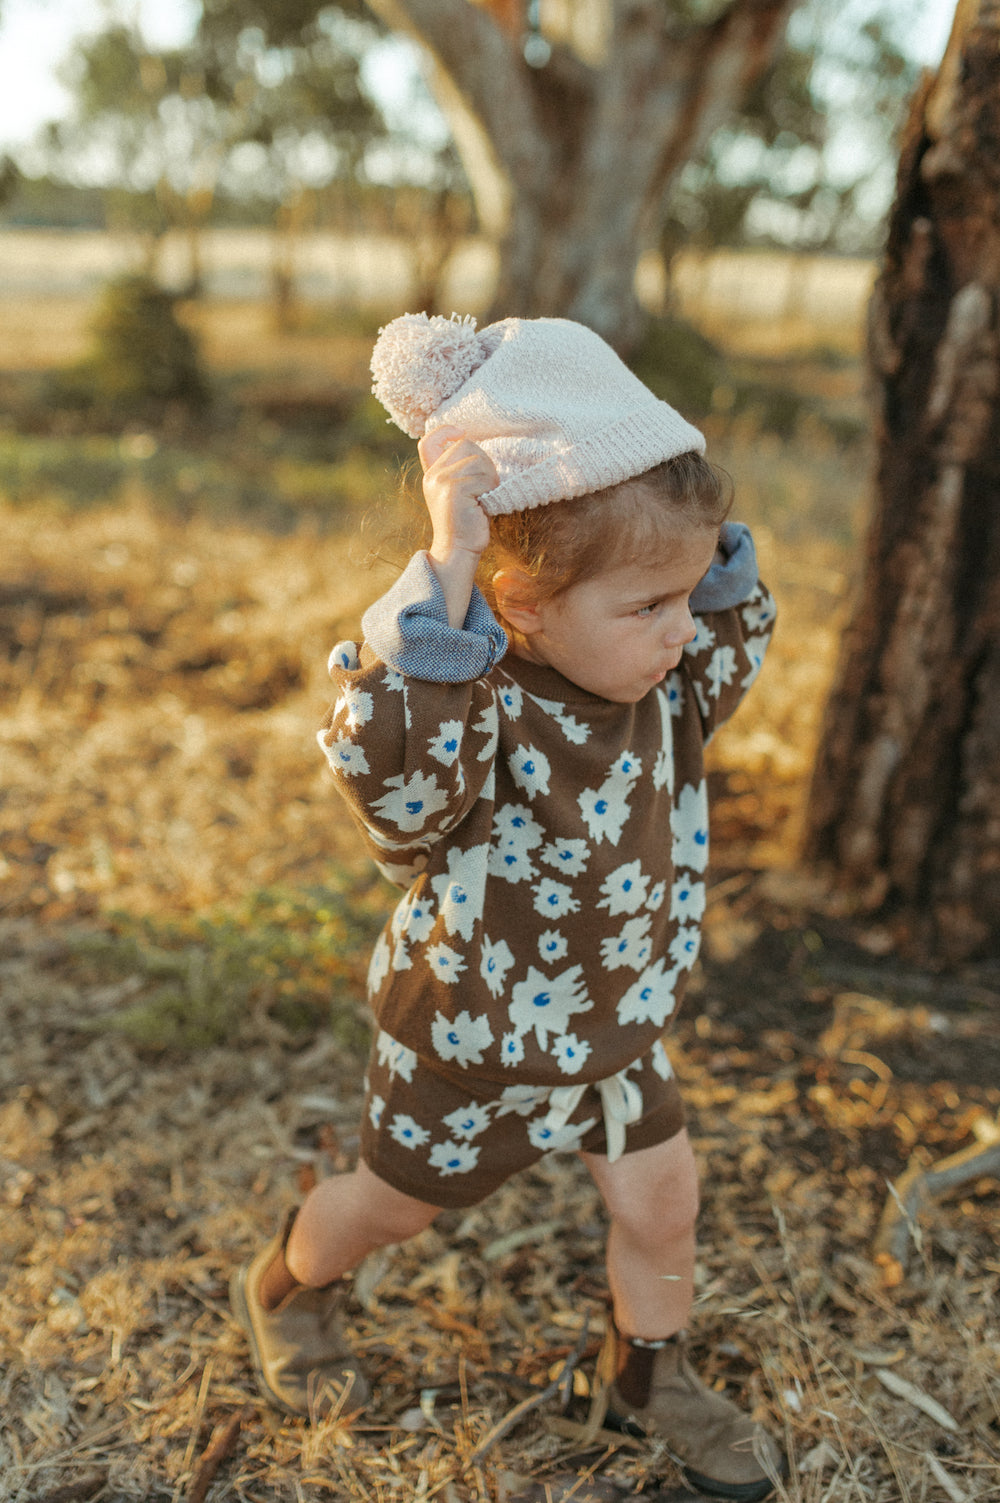 Grown Clothing USA Pansy Bloomers - Mocha Marle – The Little Kiwi Co